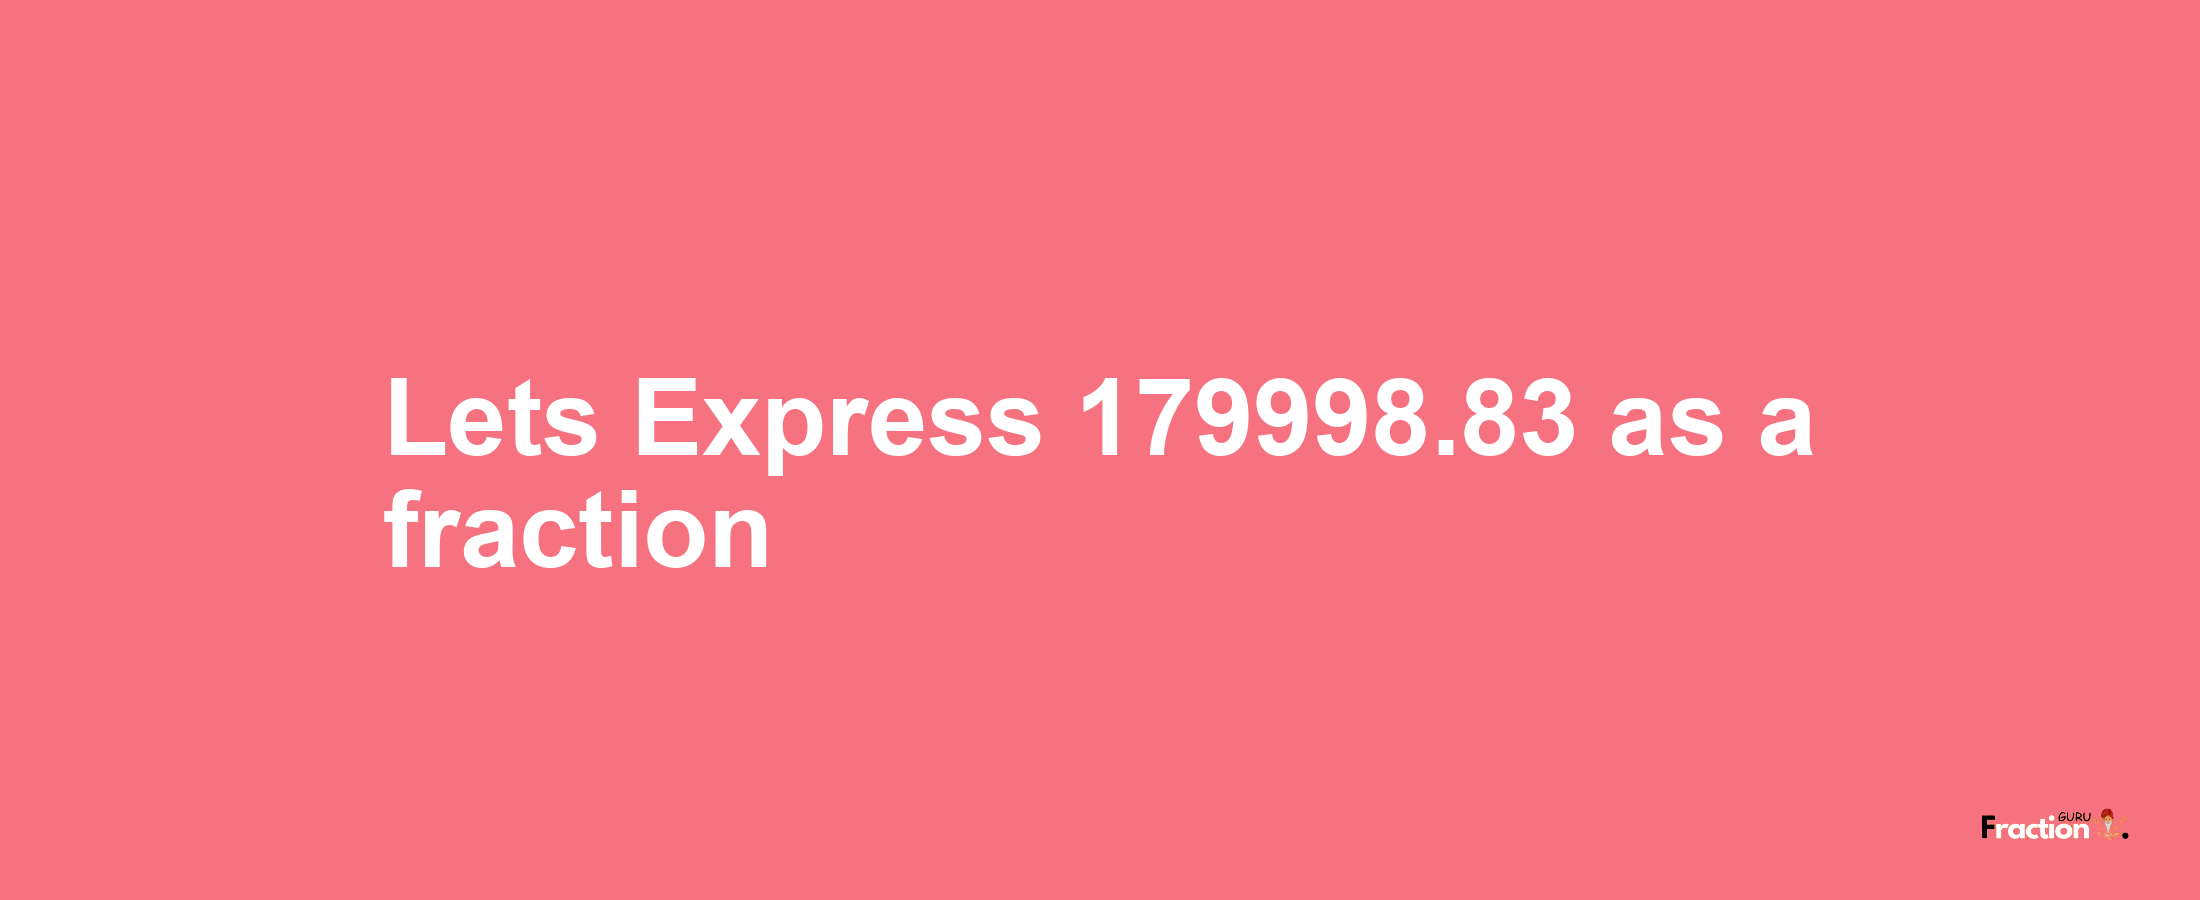 Lets Express 179998.83 as afraction